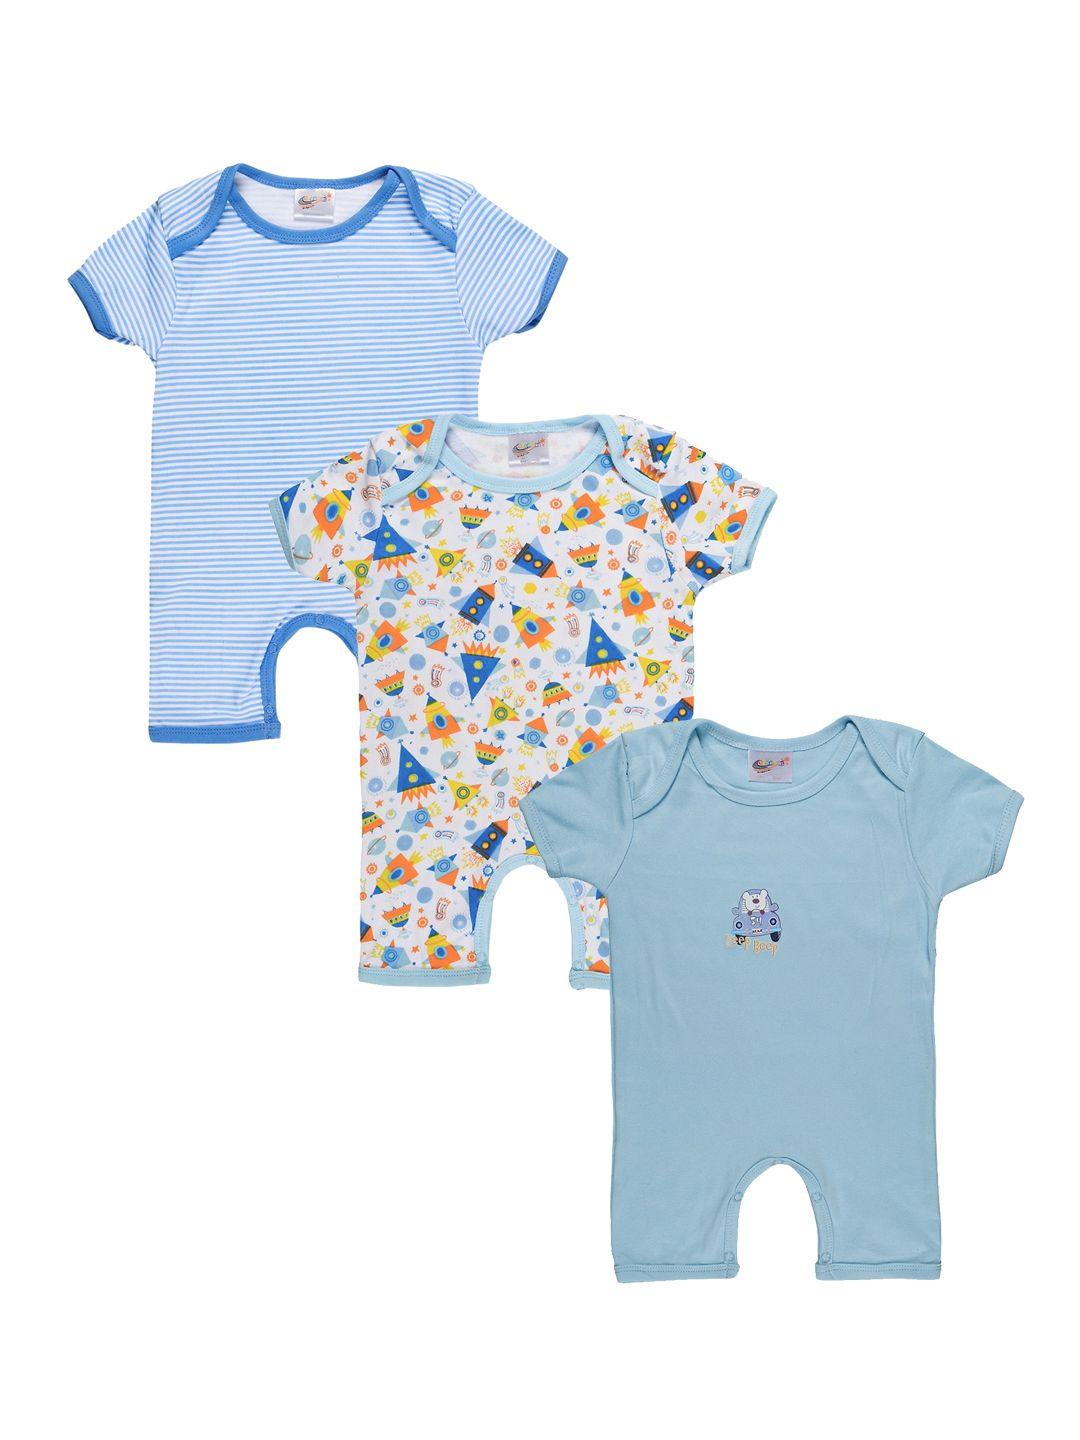 starters pack of 3 infants blue & white printed 100% cotton rompers